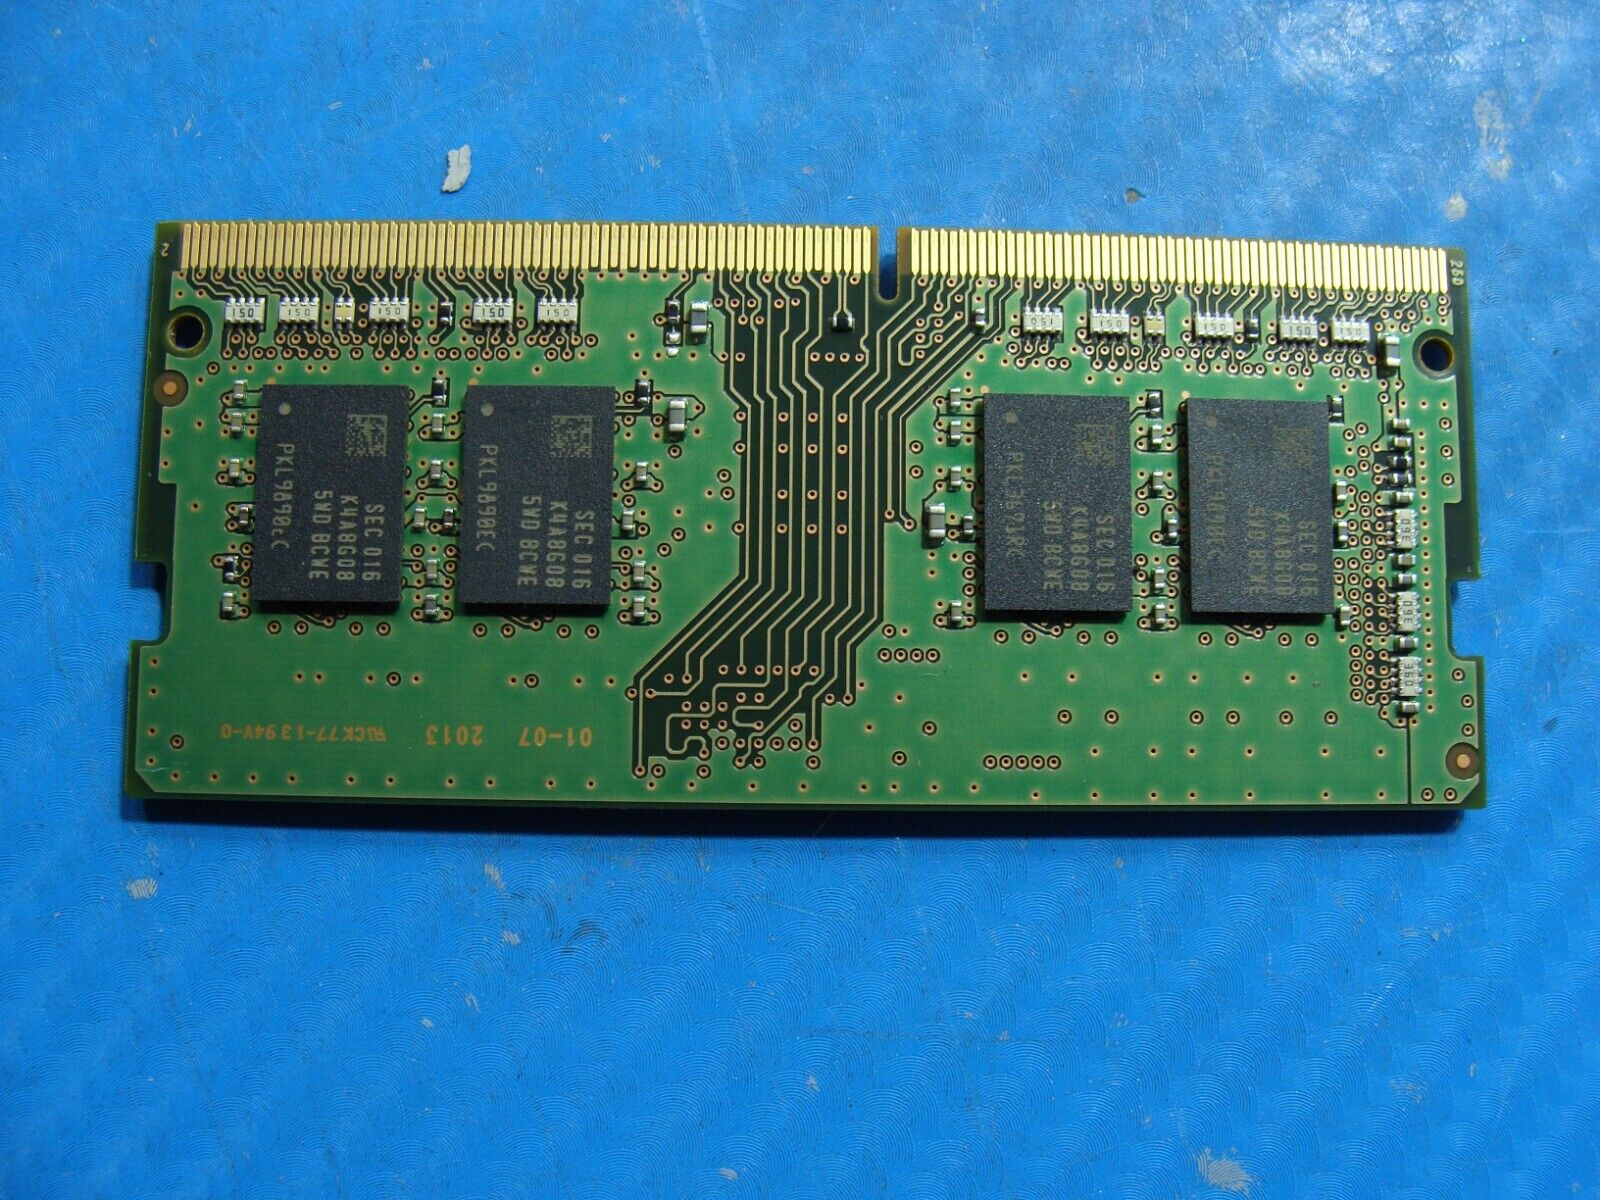 Dell 7500 2in1 Samsung 8GB 1Rx8 PC4-3200A Memory RAM SO-DIMM M471A1K43DB1-CWE